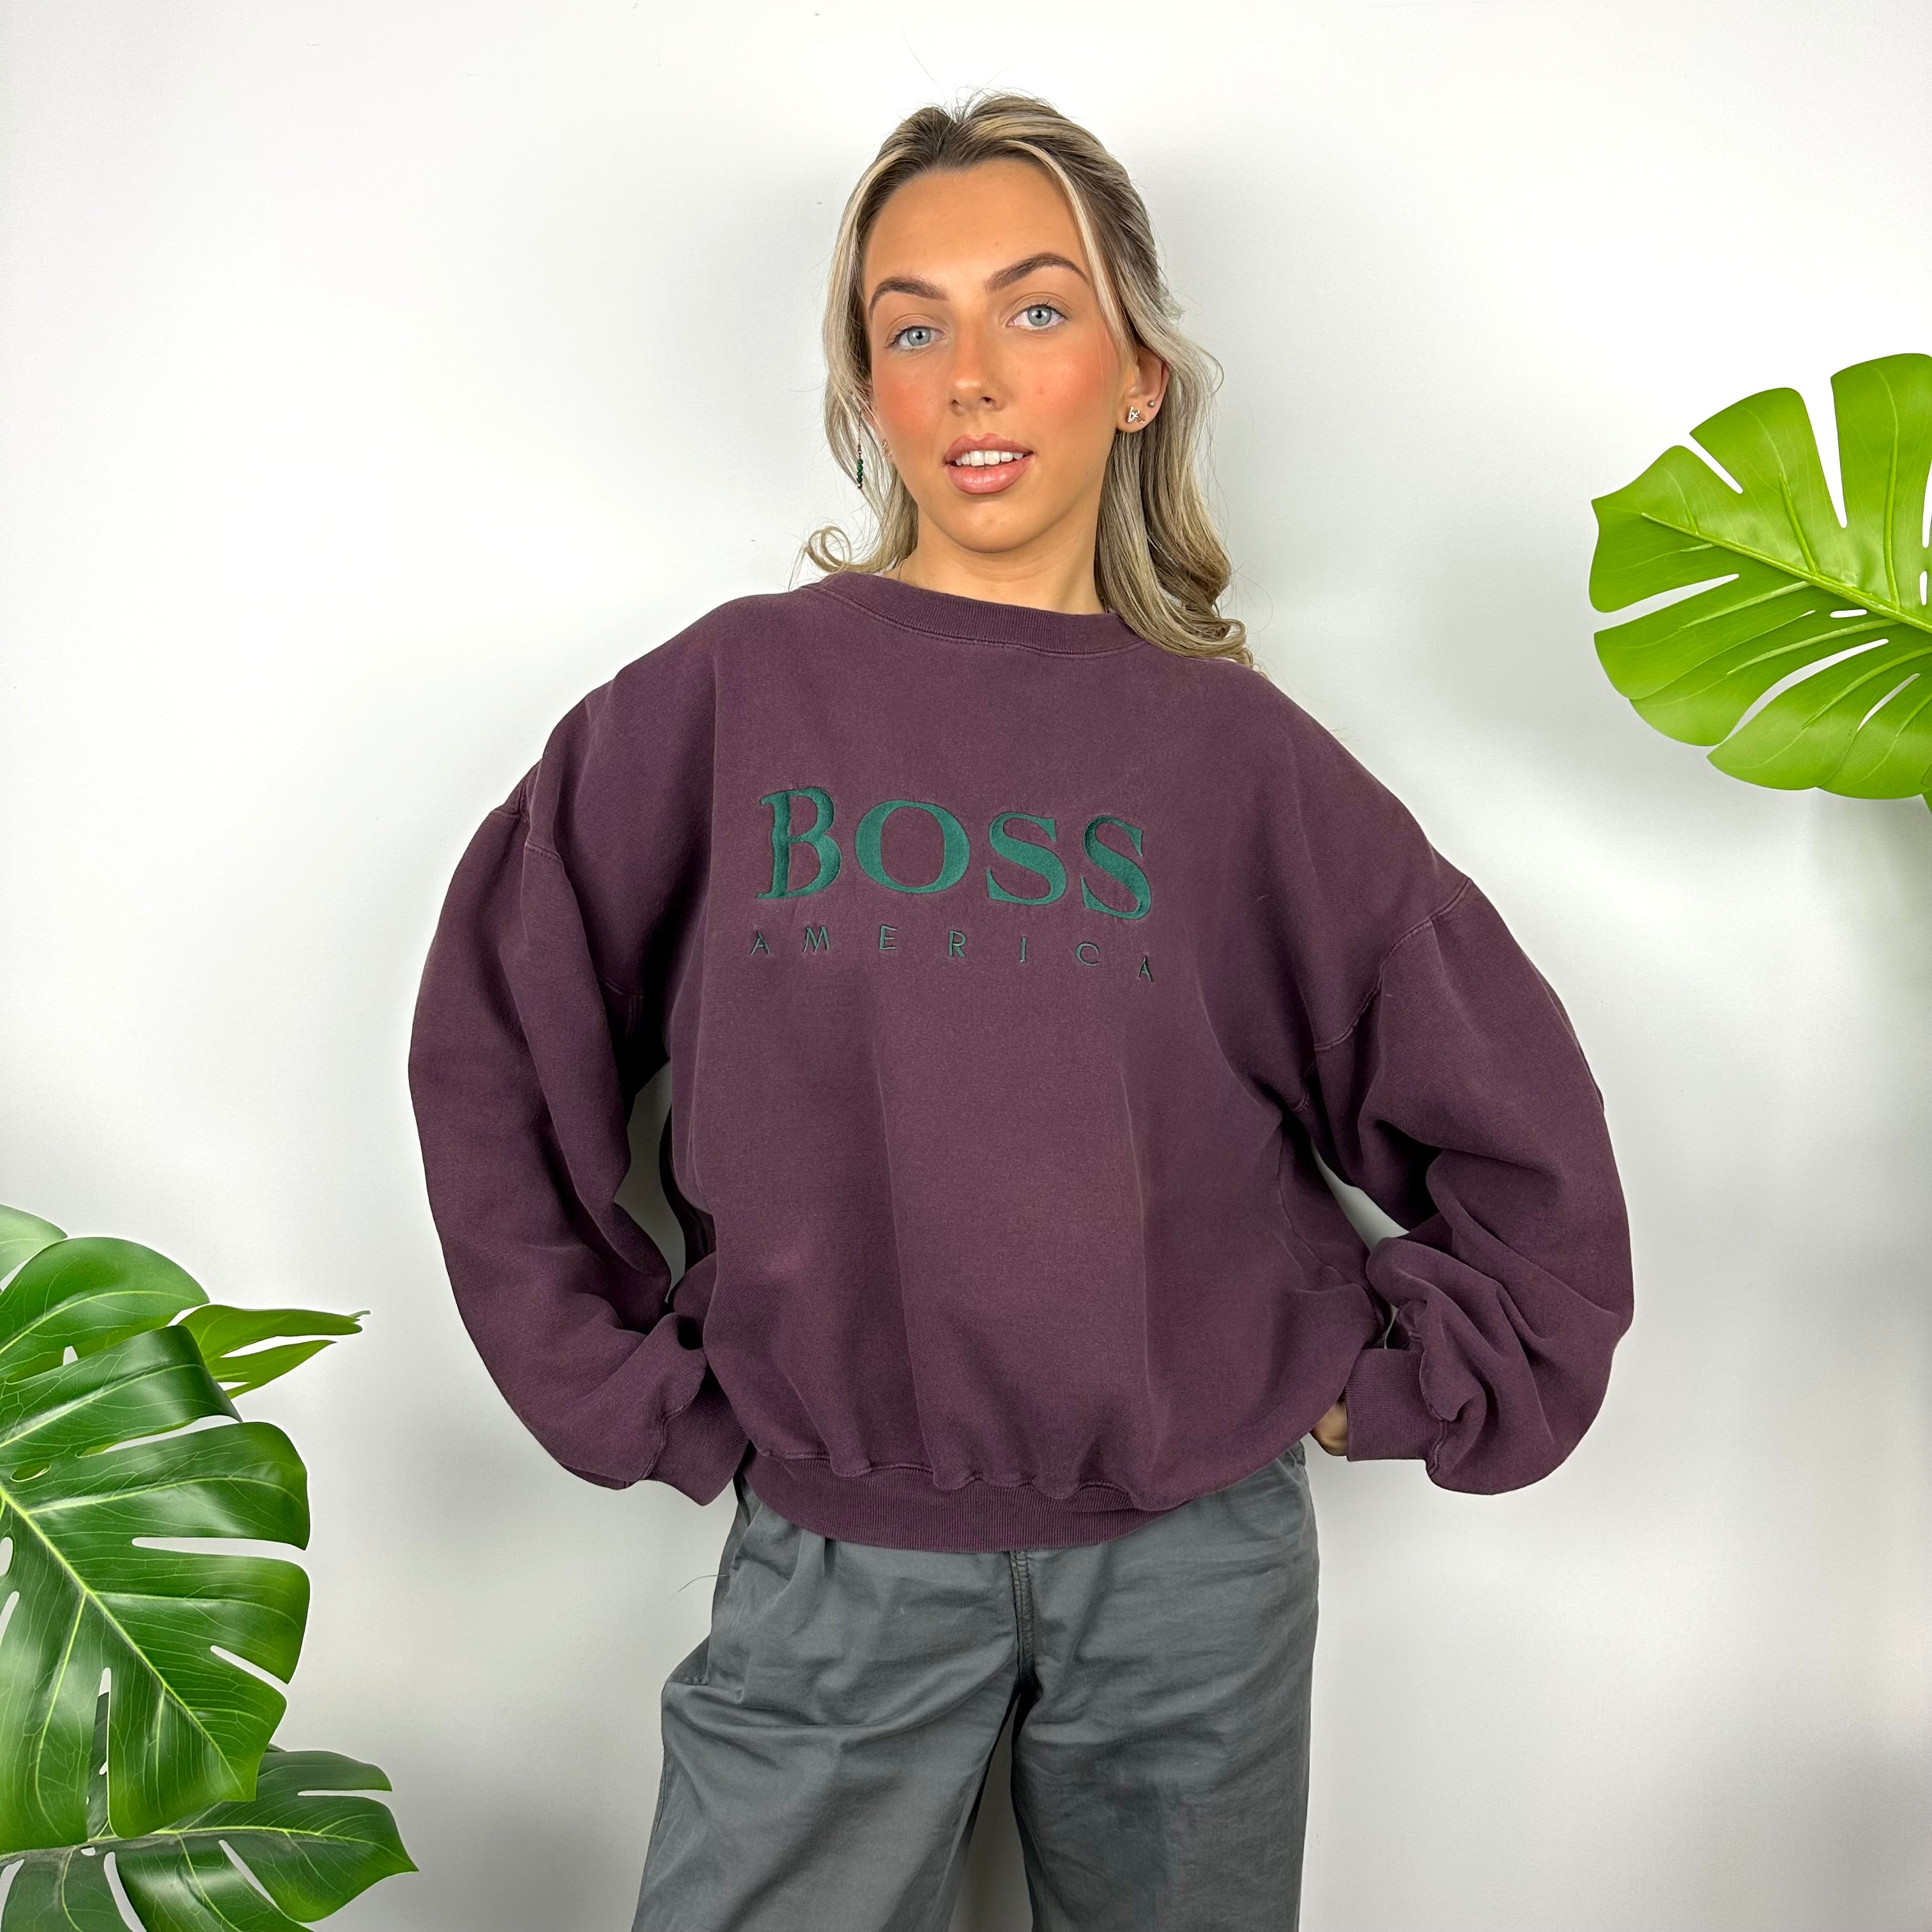 Boss America Maroon Embroidered Spell Out Sweatshirt (M)